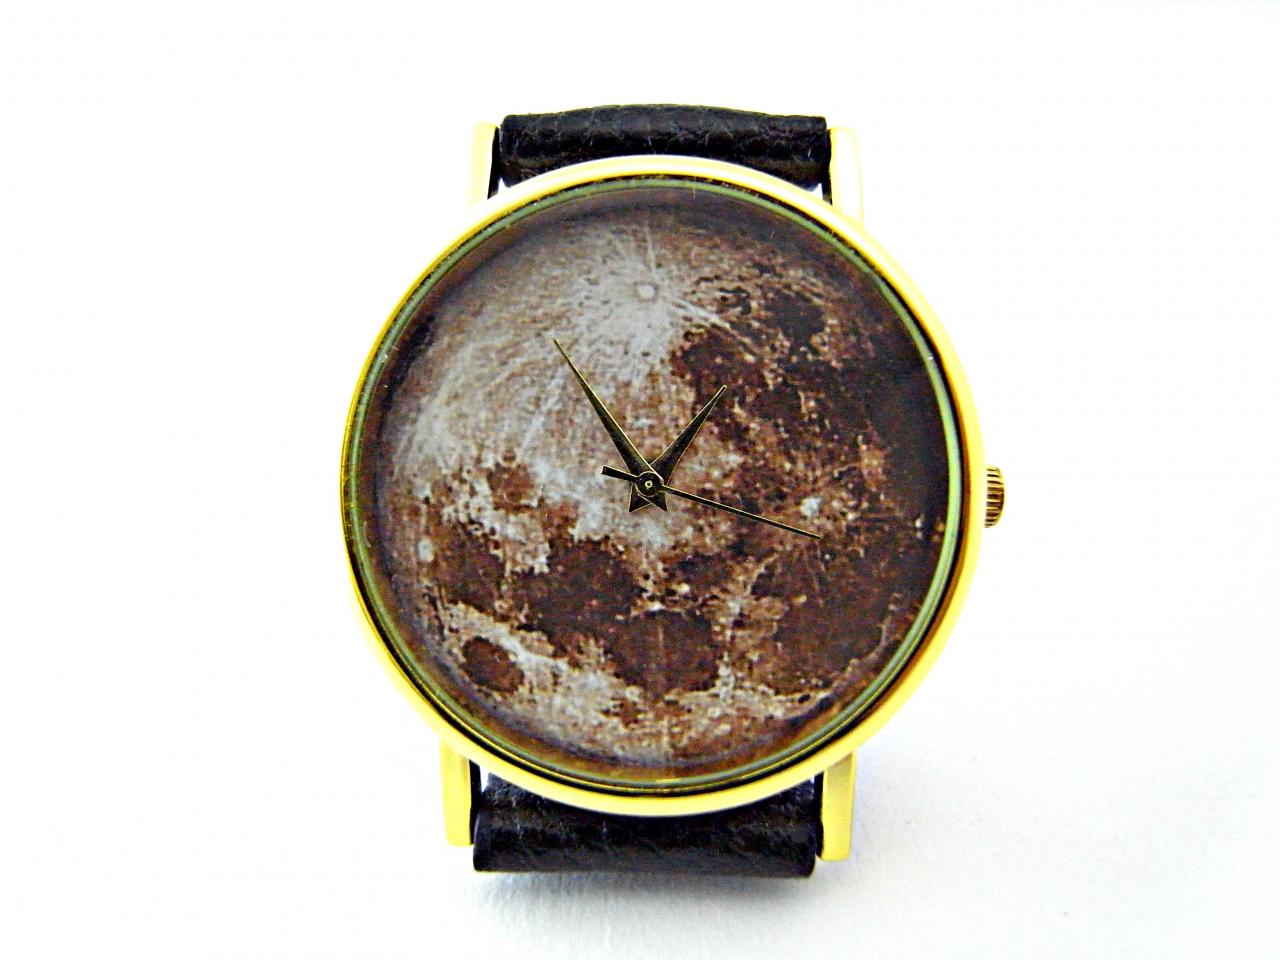 Full Moon Leather Wrist Watches, Woman Man Lady Unisex Watch, Genuine Leather Handmade Unique Watch #15